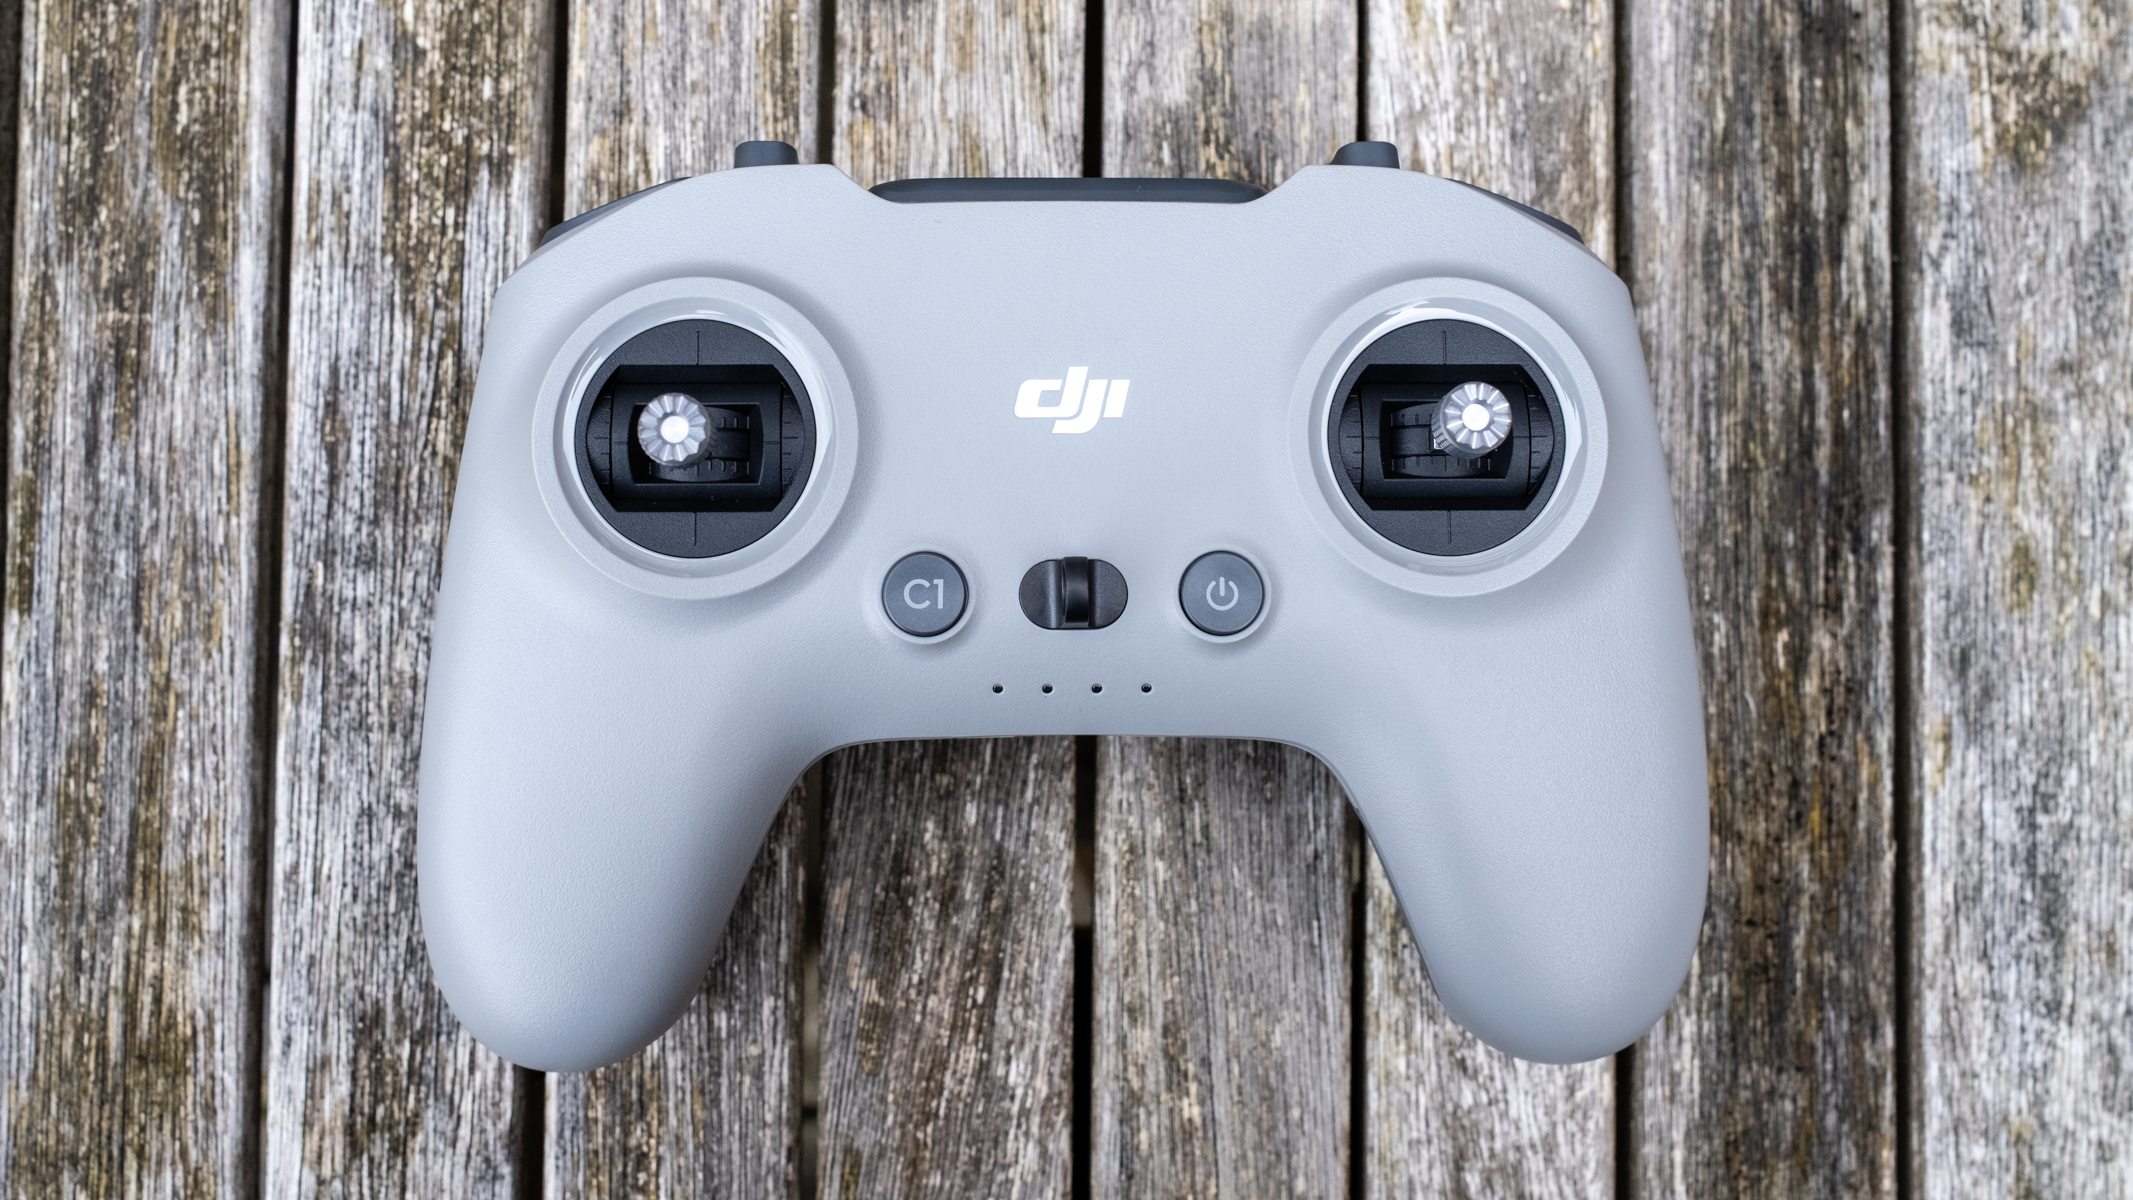 DJI FPV Remote Controller 3 front view